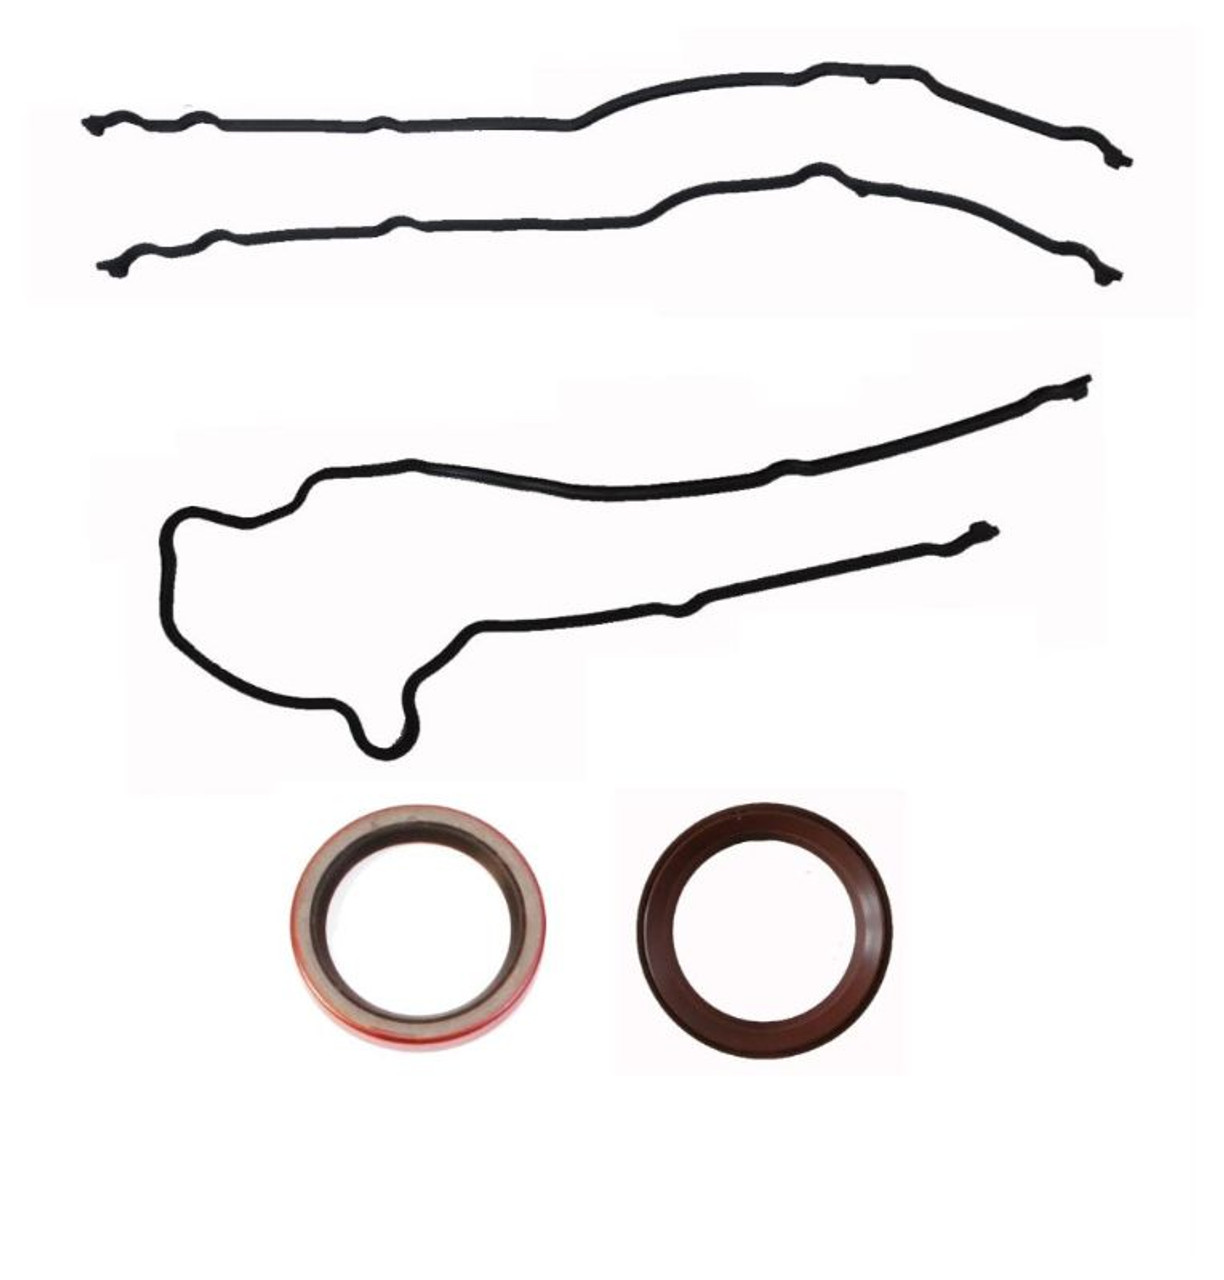 1997 Ford E-150 Econoline 5.4L Engine Timing Cover Gasket Set TCF330-A -1